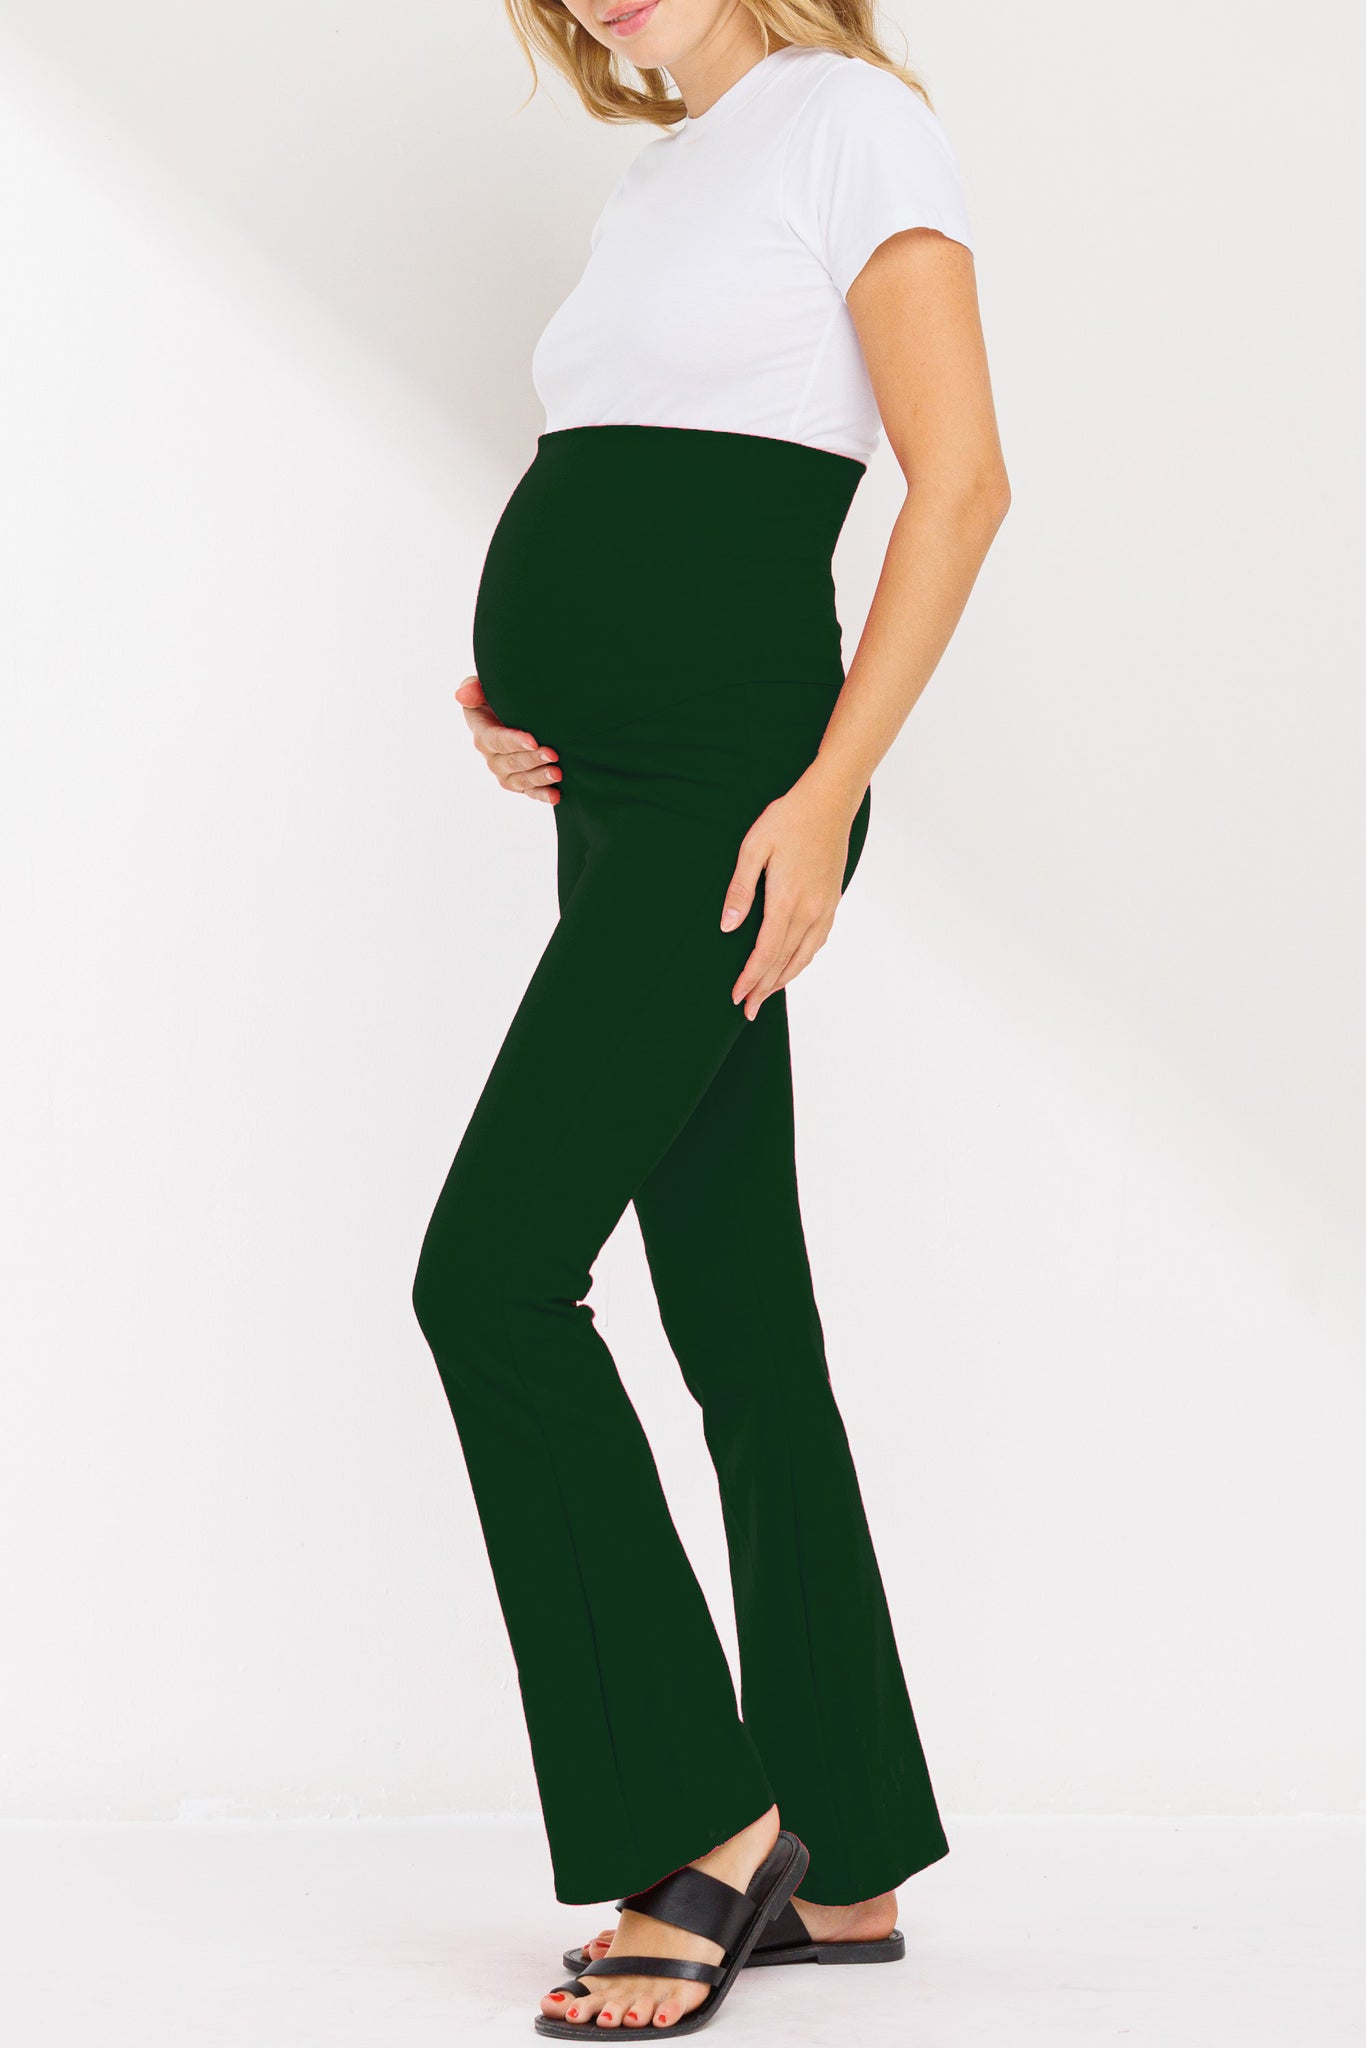 My Bump High Waisted Fold Over Belly Lounge Yoga Maternity Pants